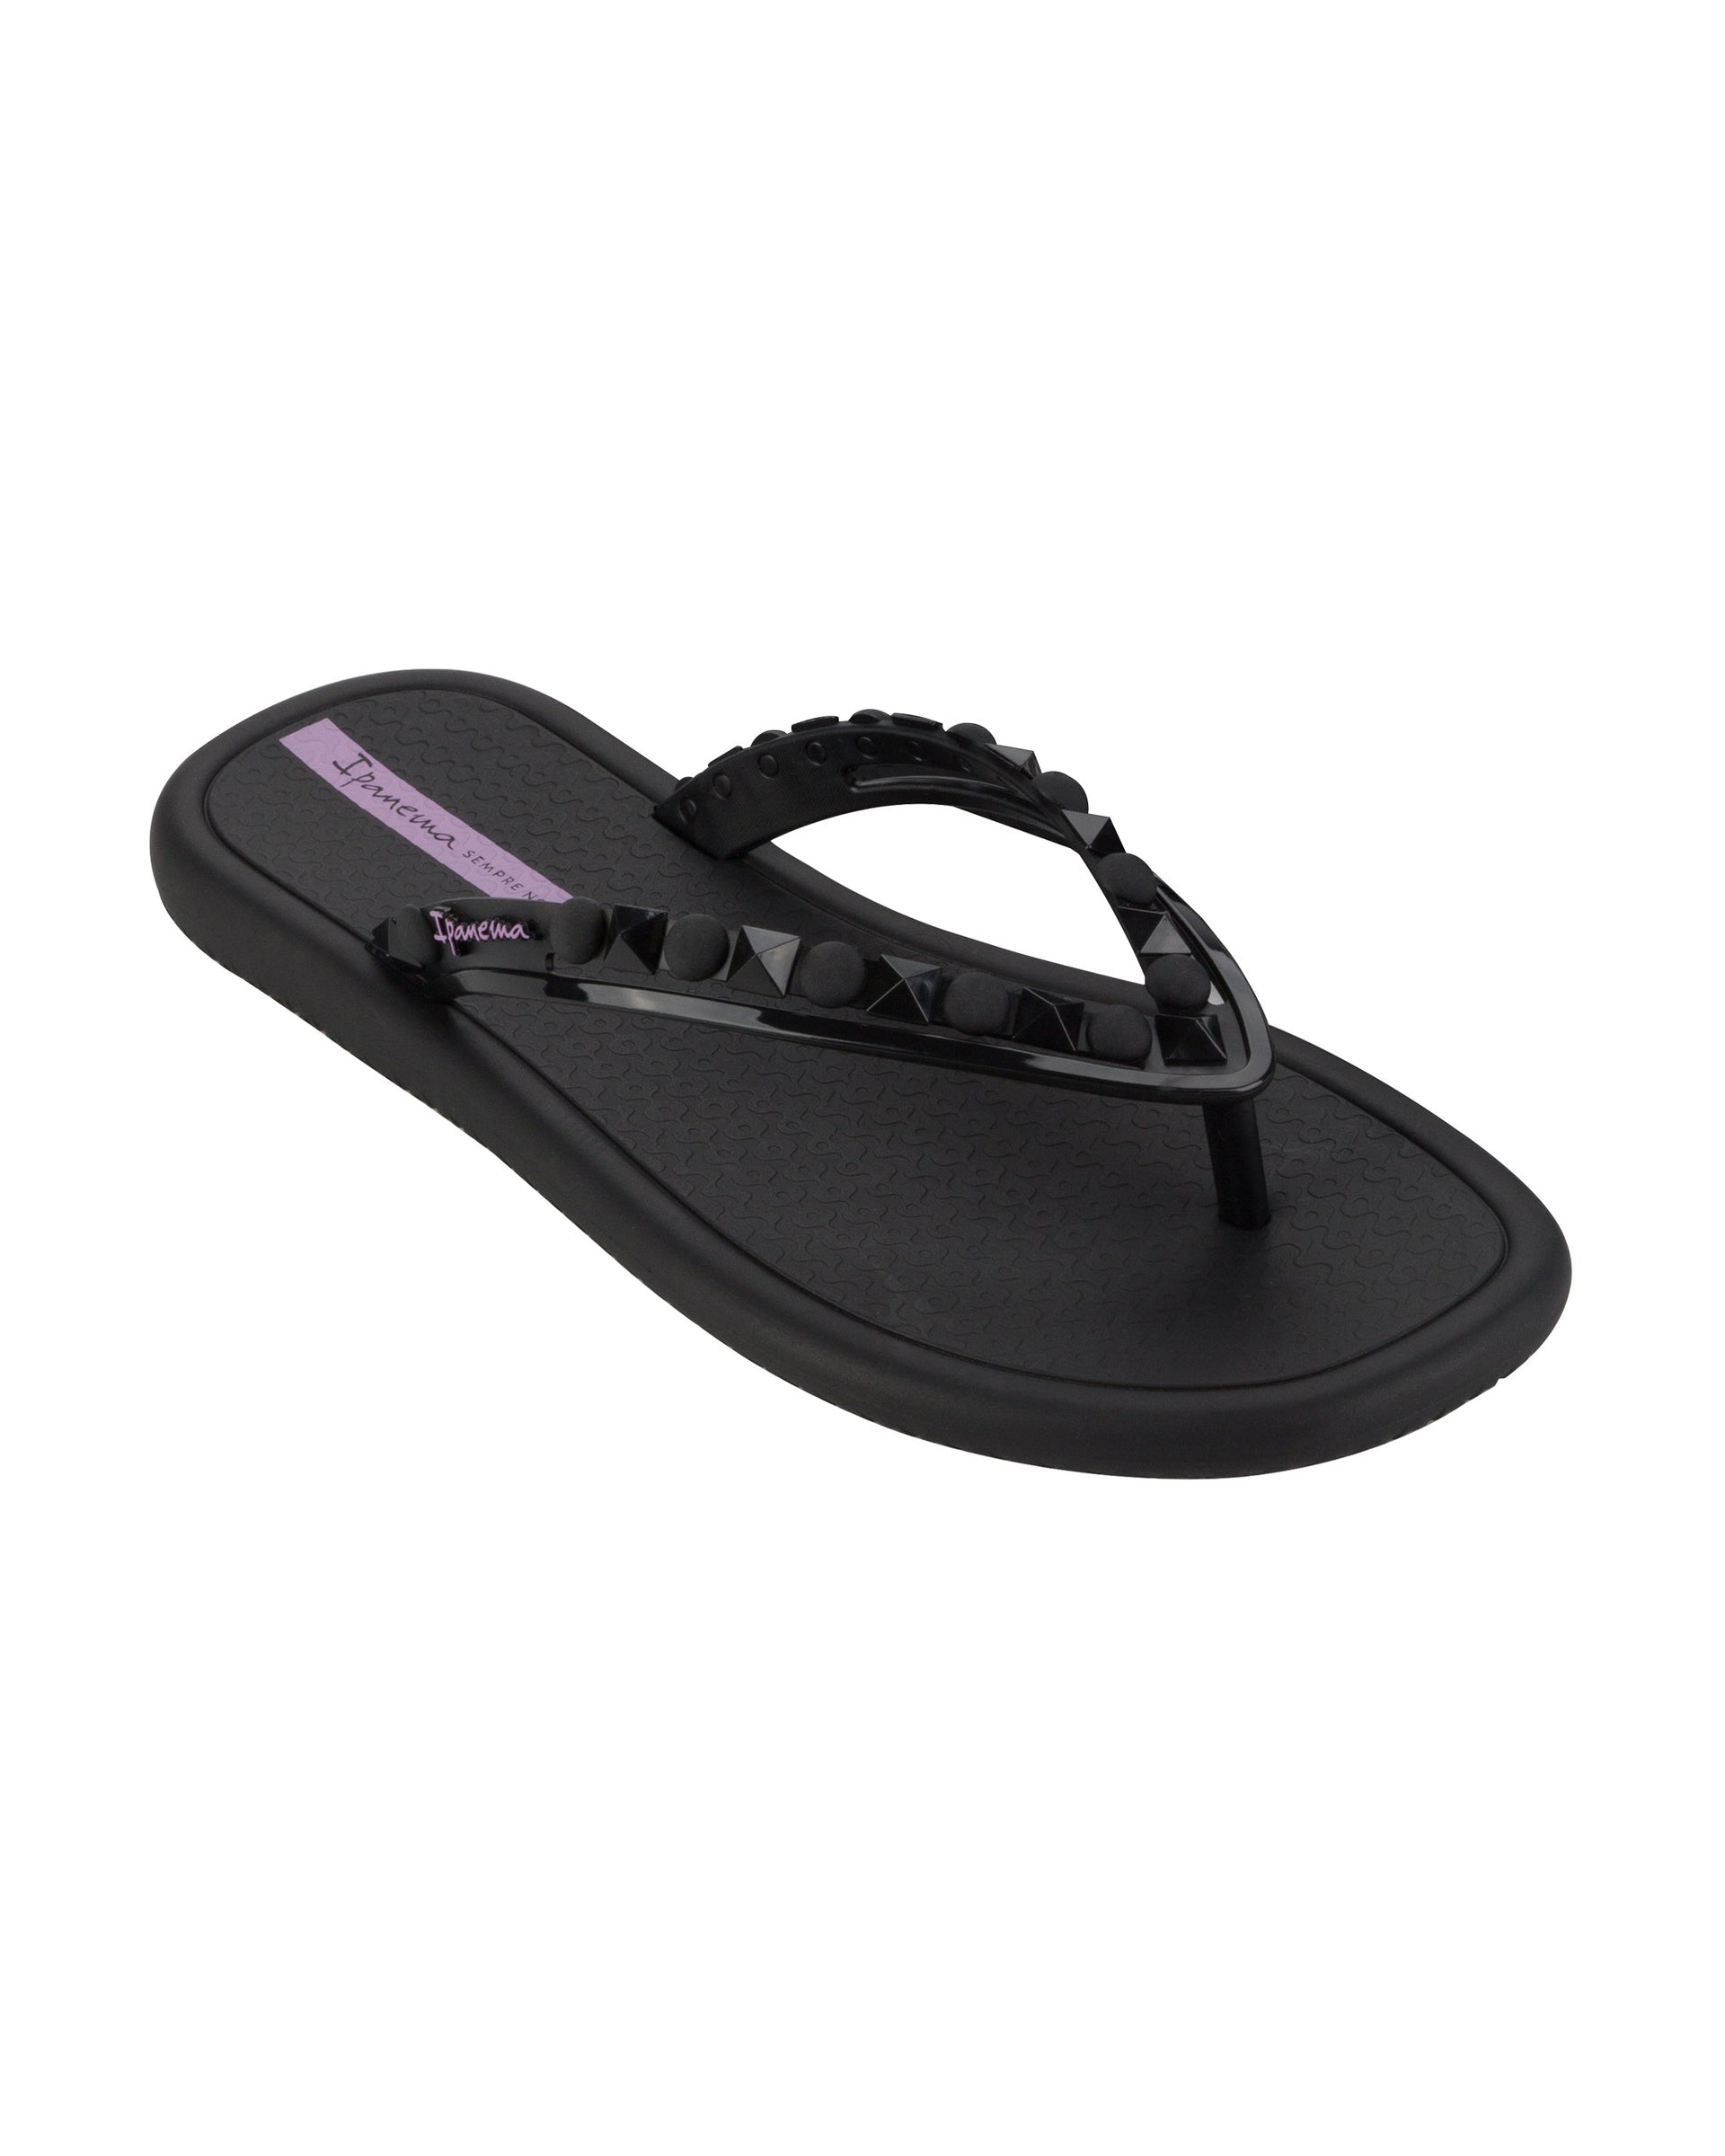 Angled view of a black Ipanema Meu Sol women's flip flop with stud details on strap.